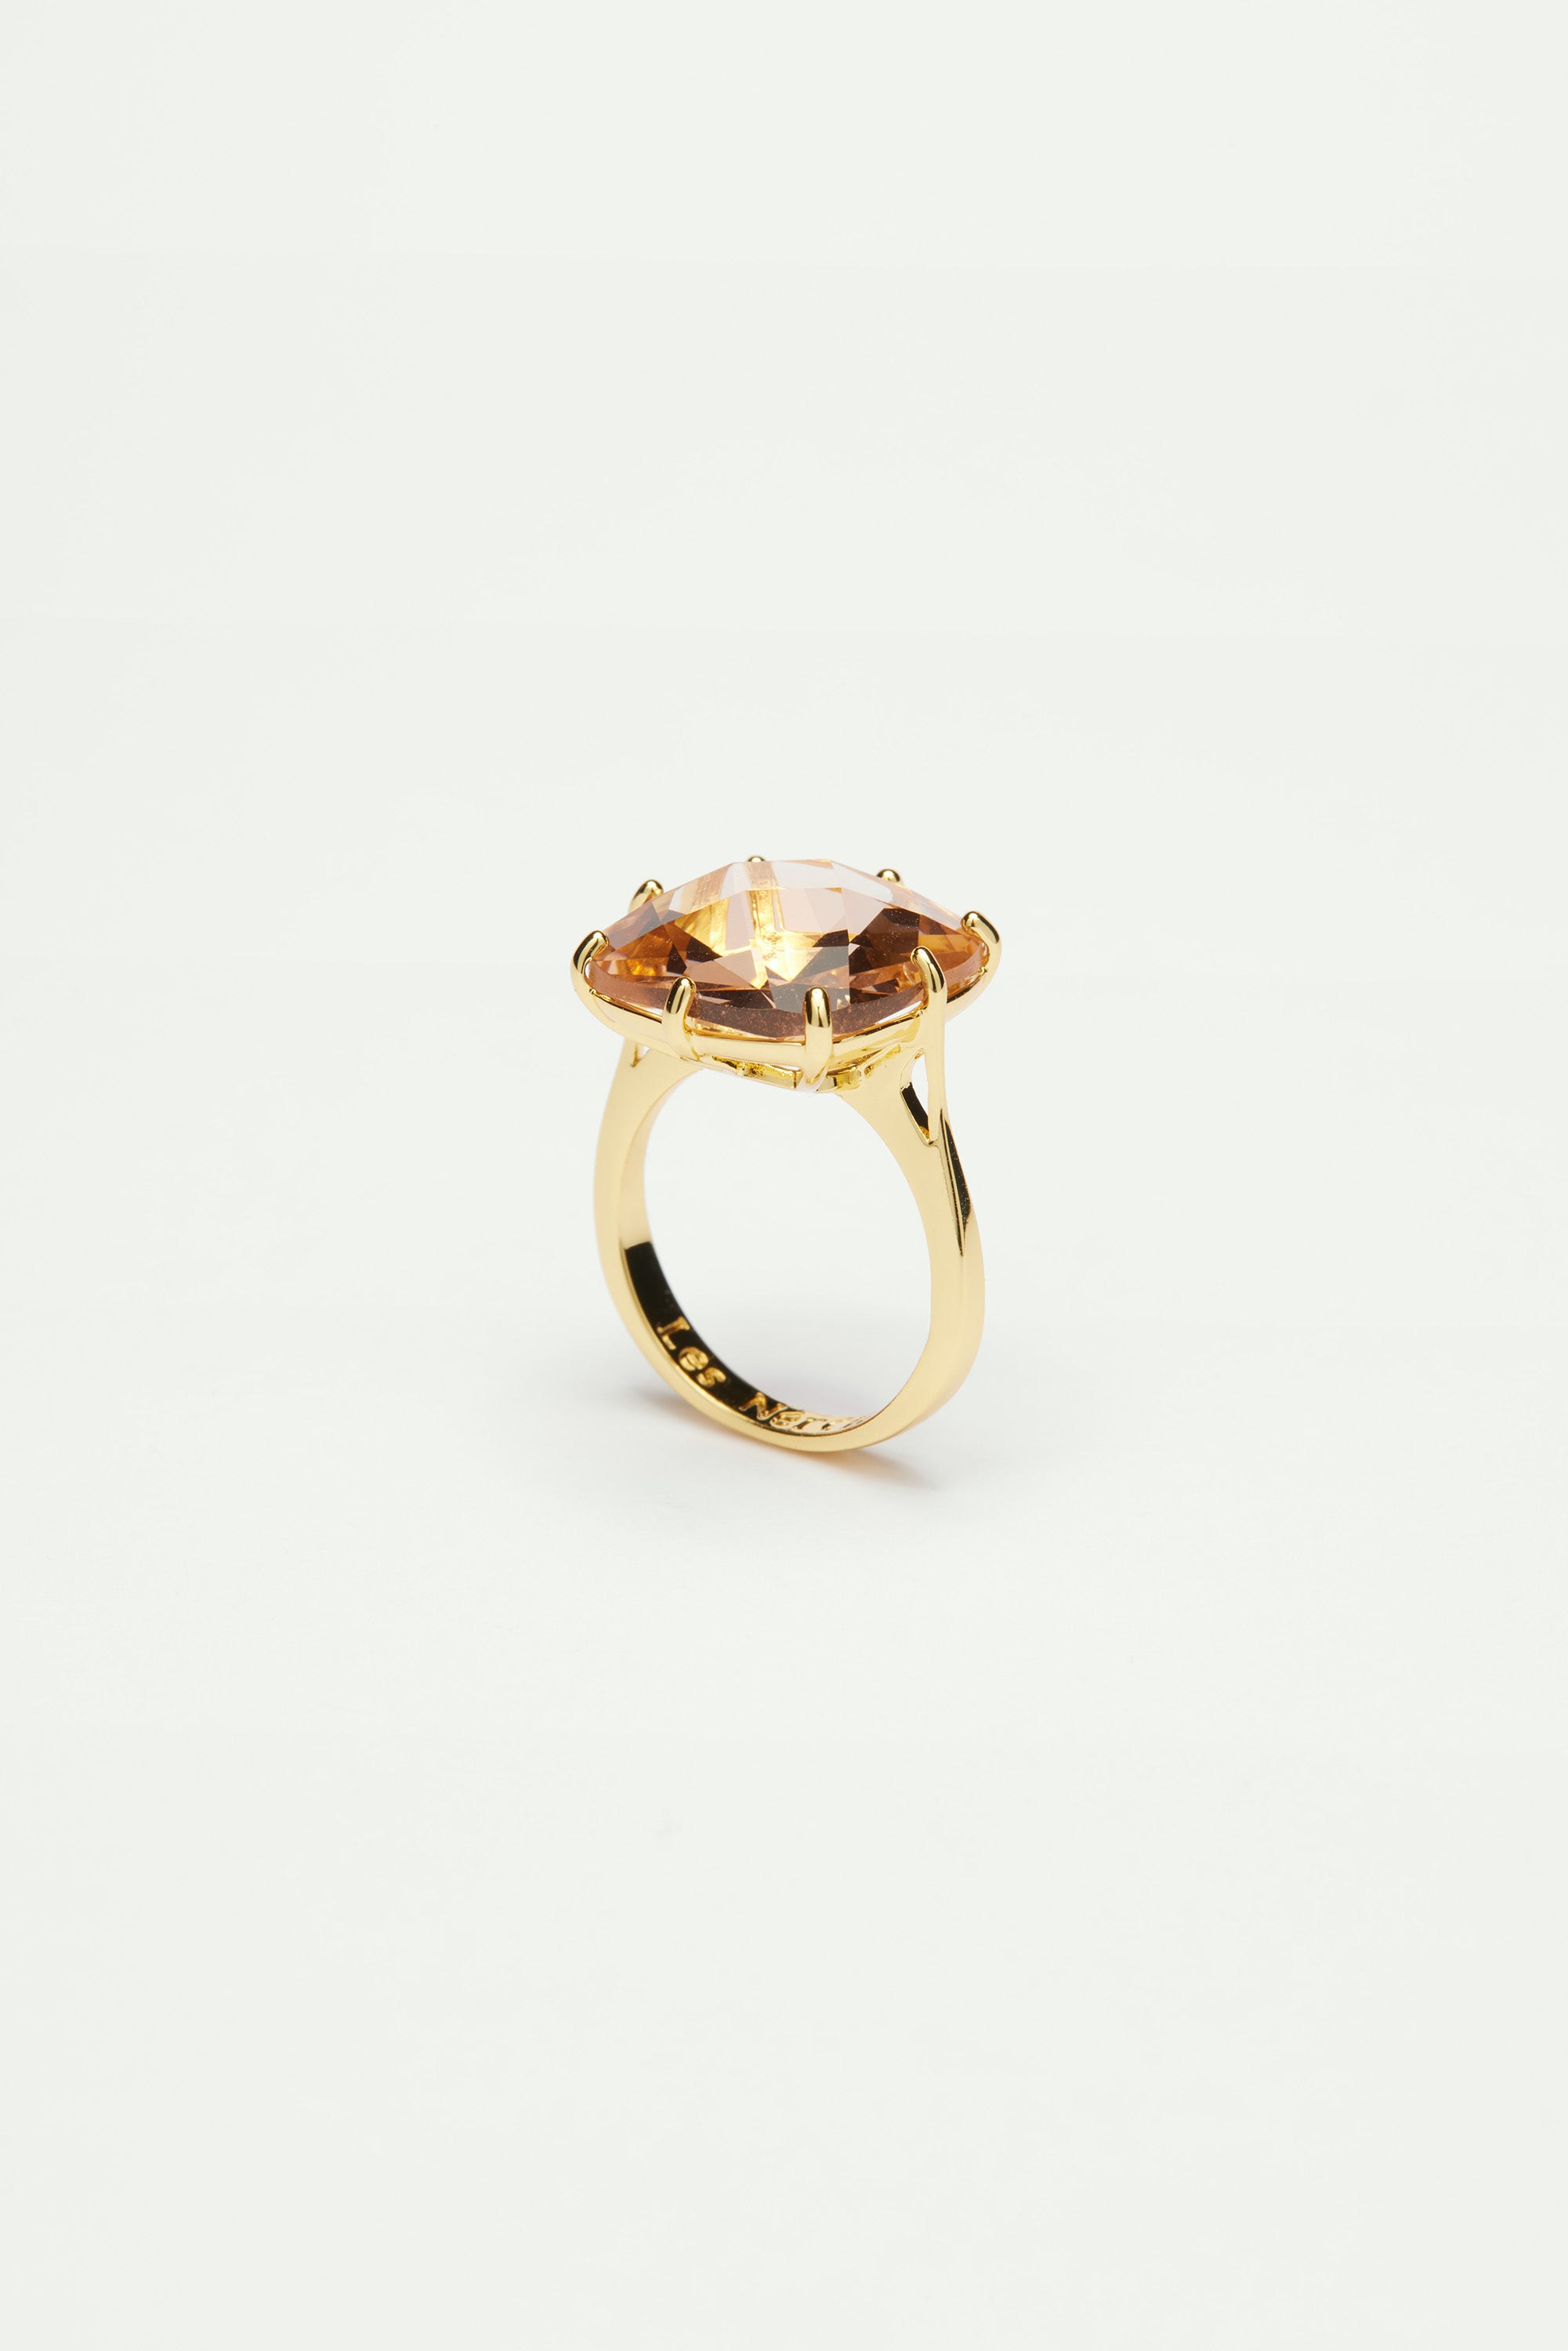 Apricot pink diamantine square solitaire ring